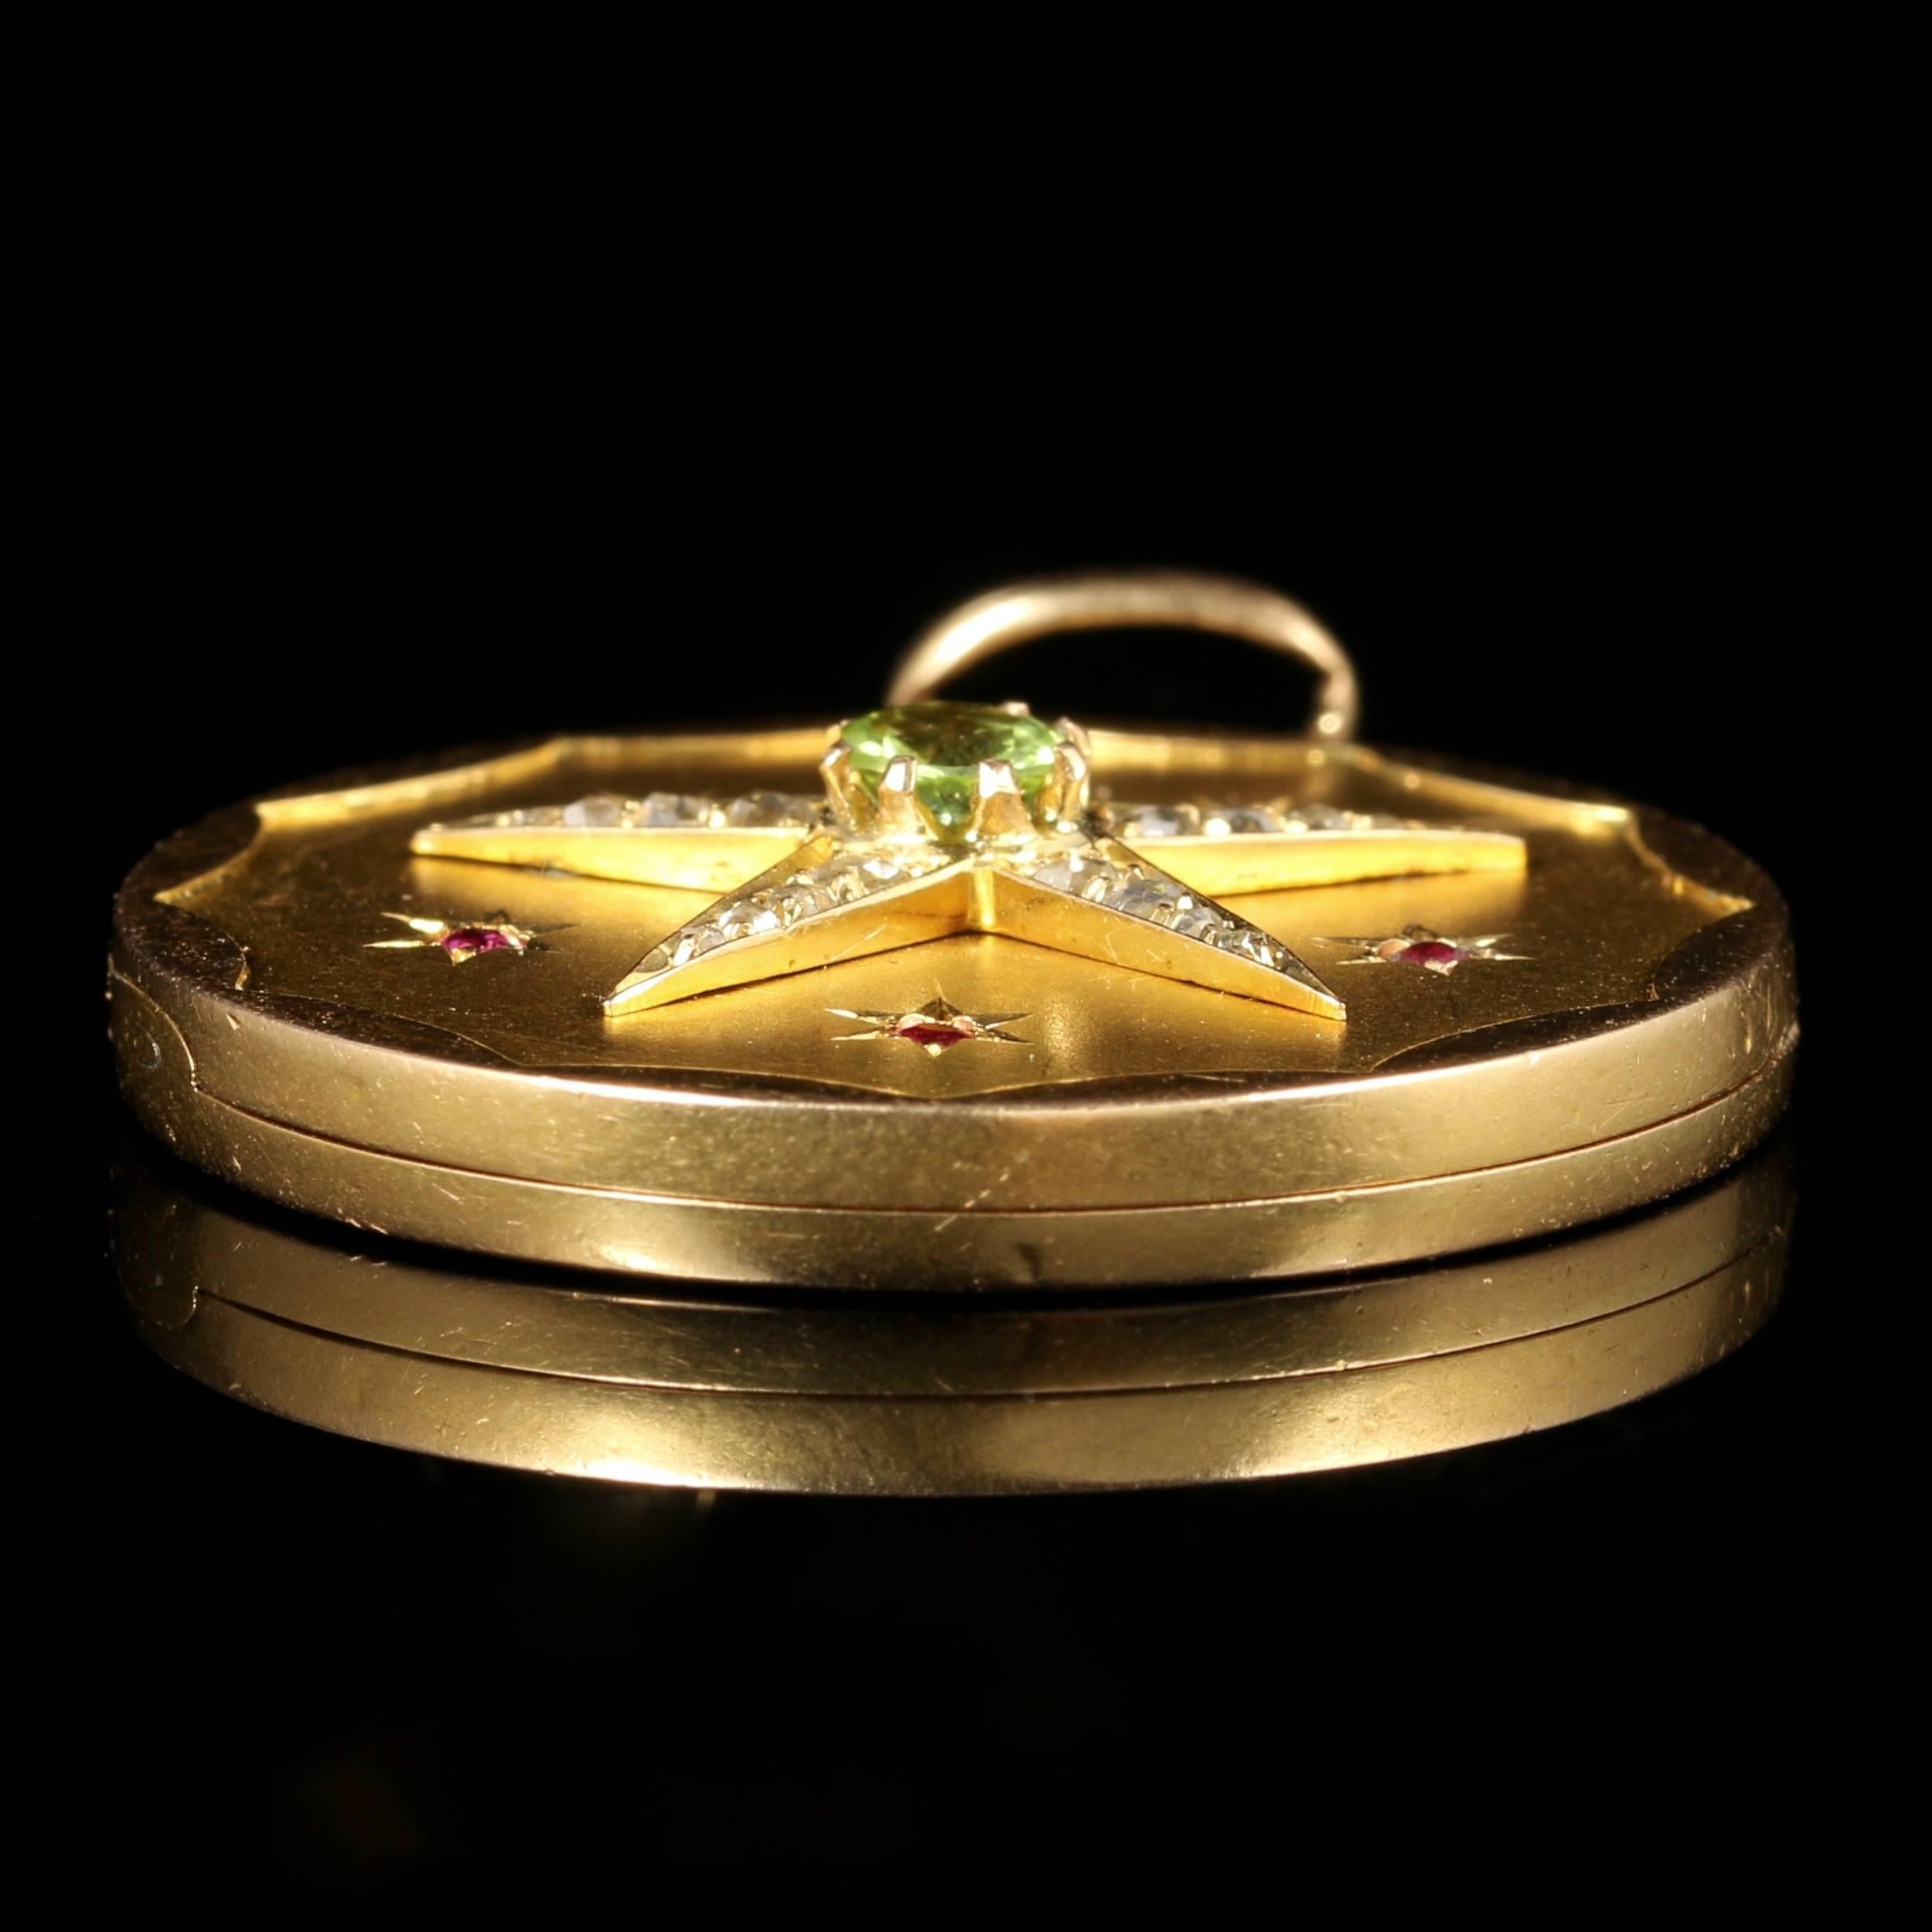 This beautiful Suffragette 18ct Yellow Gold locket is Circa 1900.

The star is set in 18ct Yellow Gold and adorned with Diamonds, Peridots and Rubies.

All original Victorian genuine Suffragette.

Suffragettes liked to be depicted as feminine, their